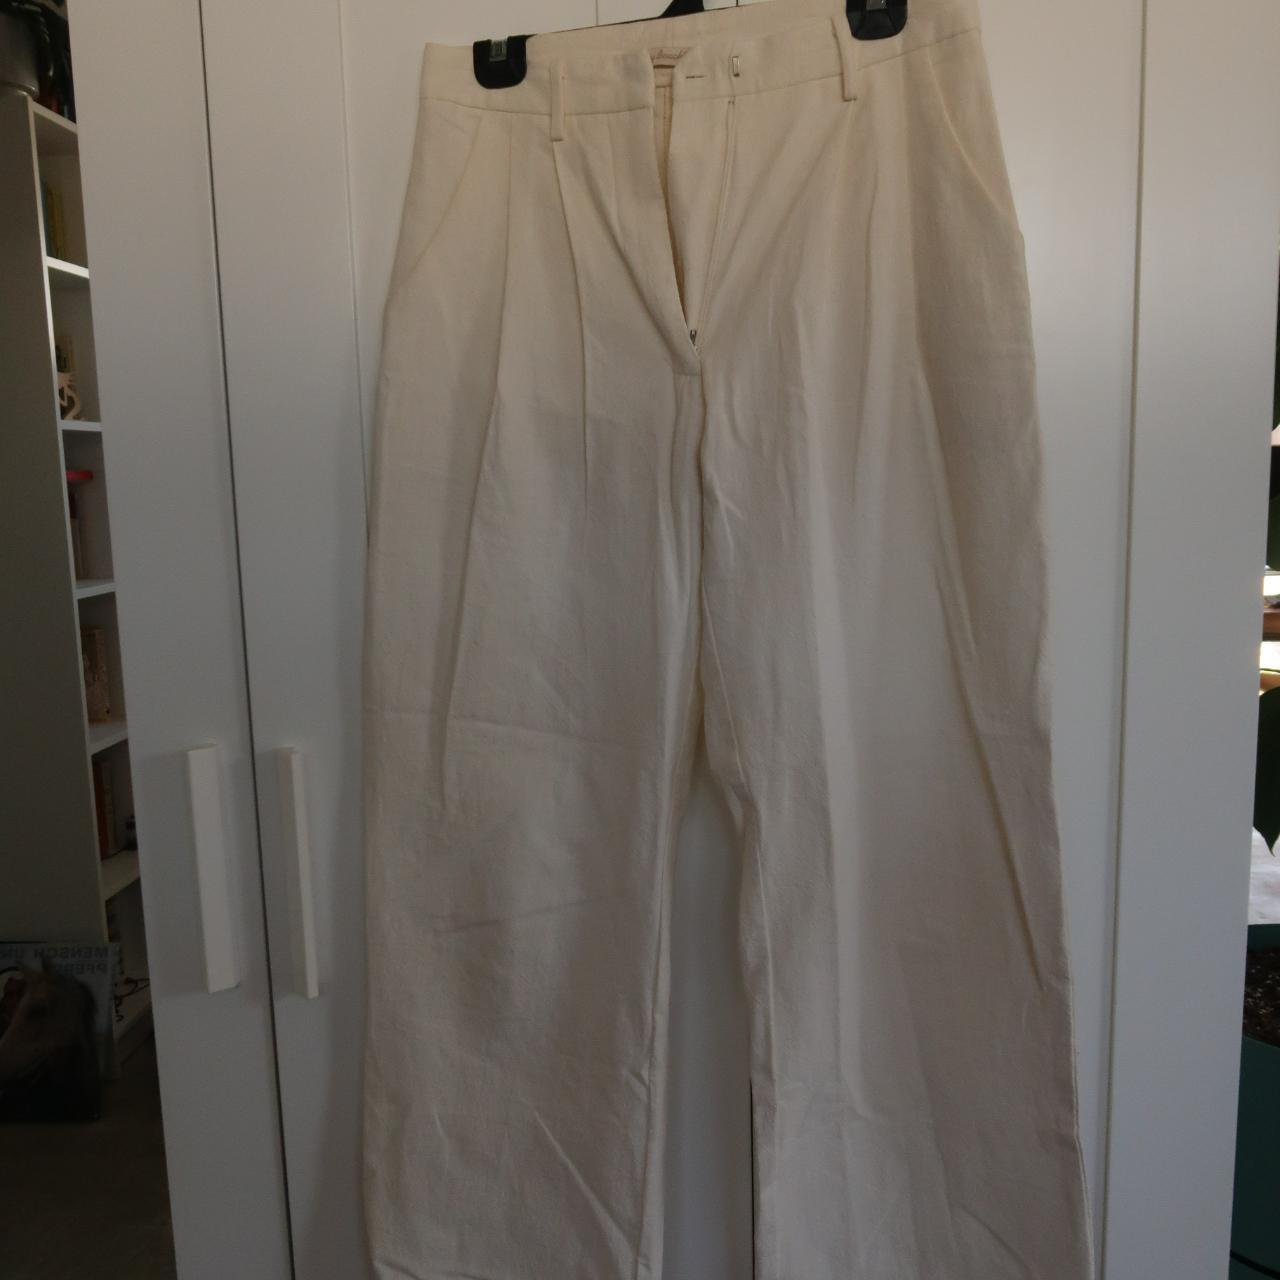 Cotton linen pants - purchased on here but... - Depop